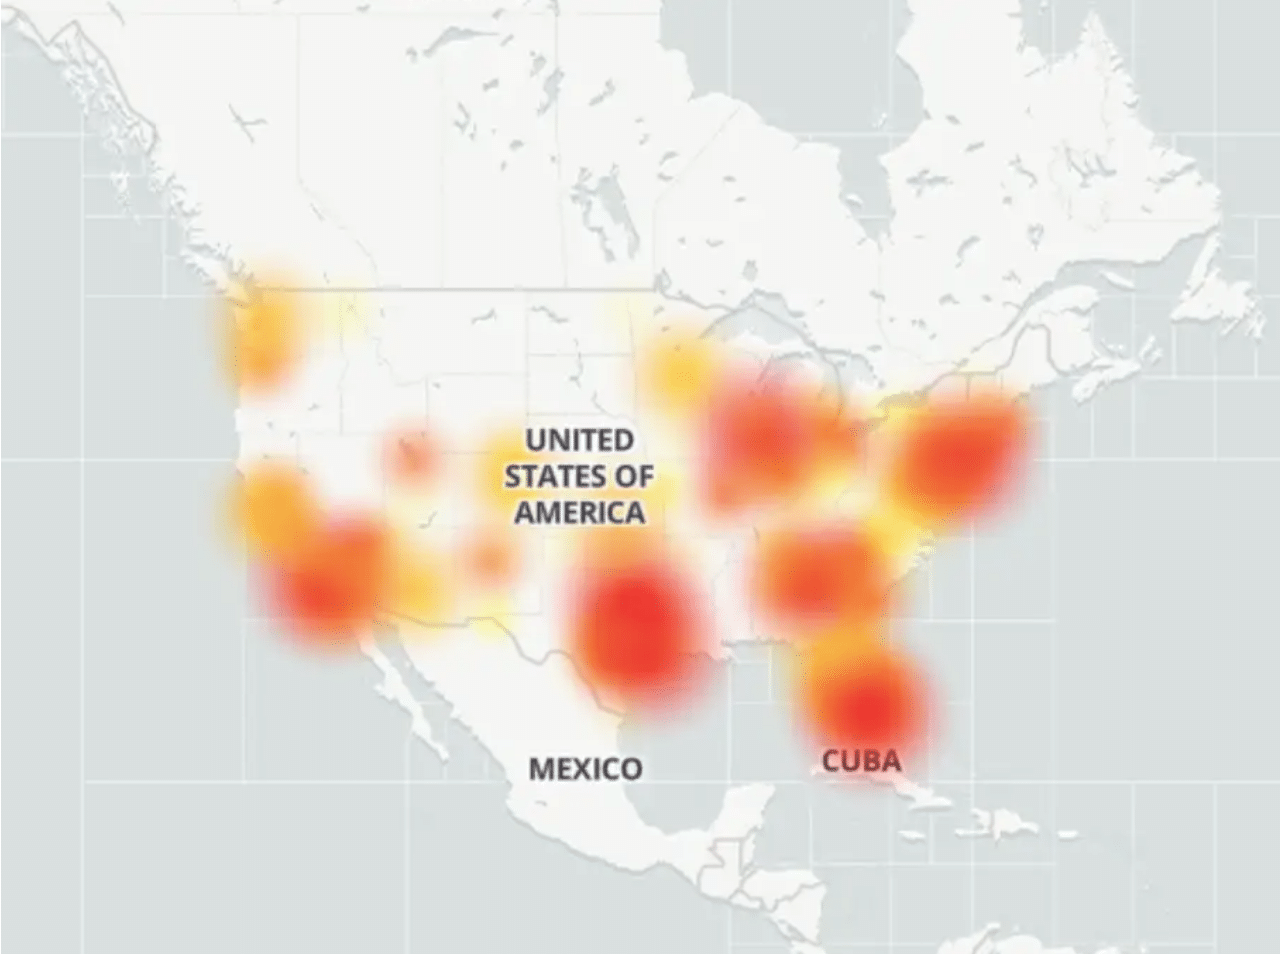 DEVELOPING US cell phone operators experiencing widespread outages